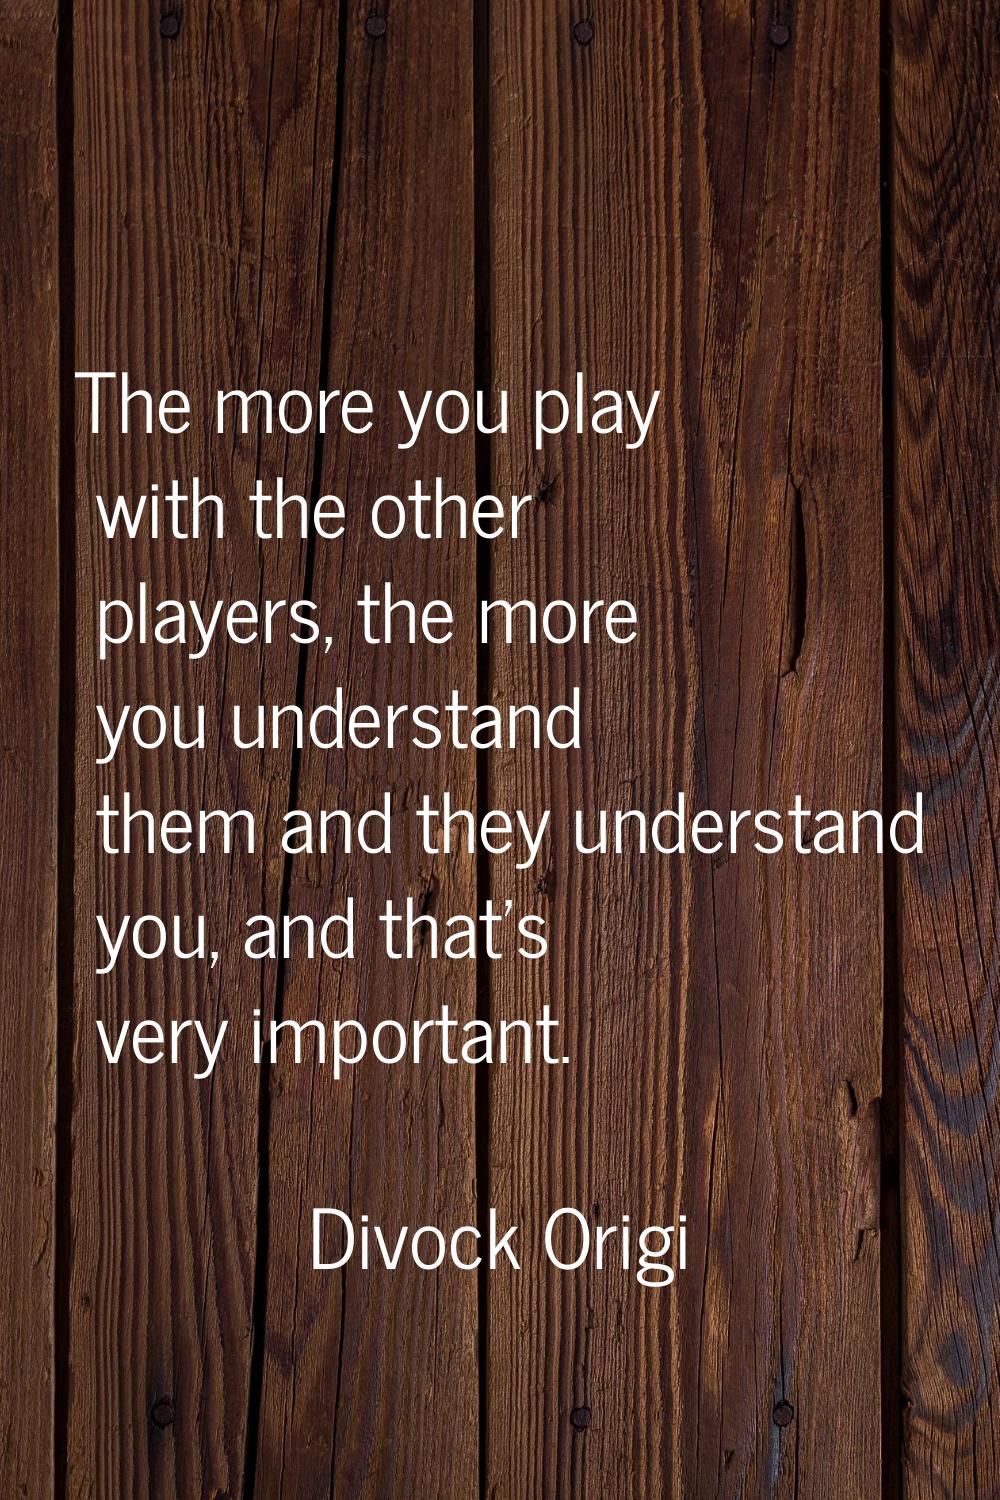 The more you play with the other players, the more you understand them and they understand you, and